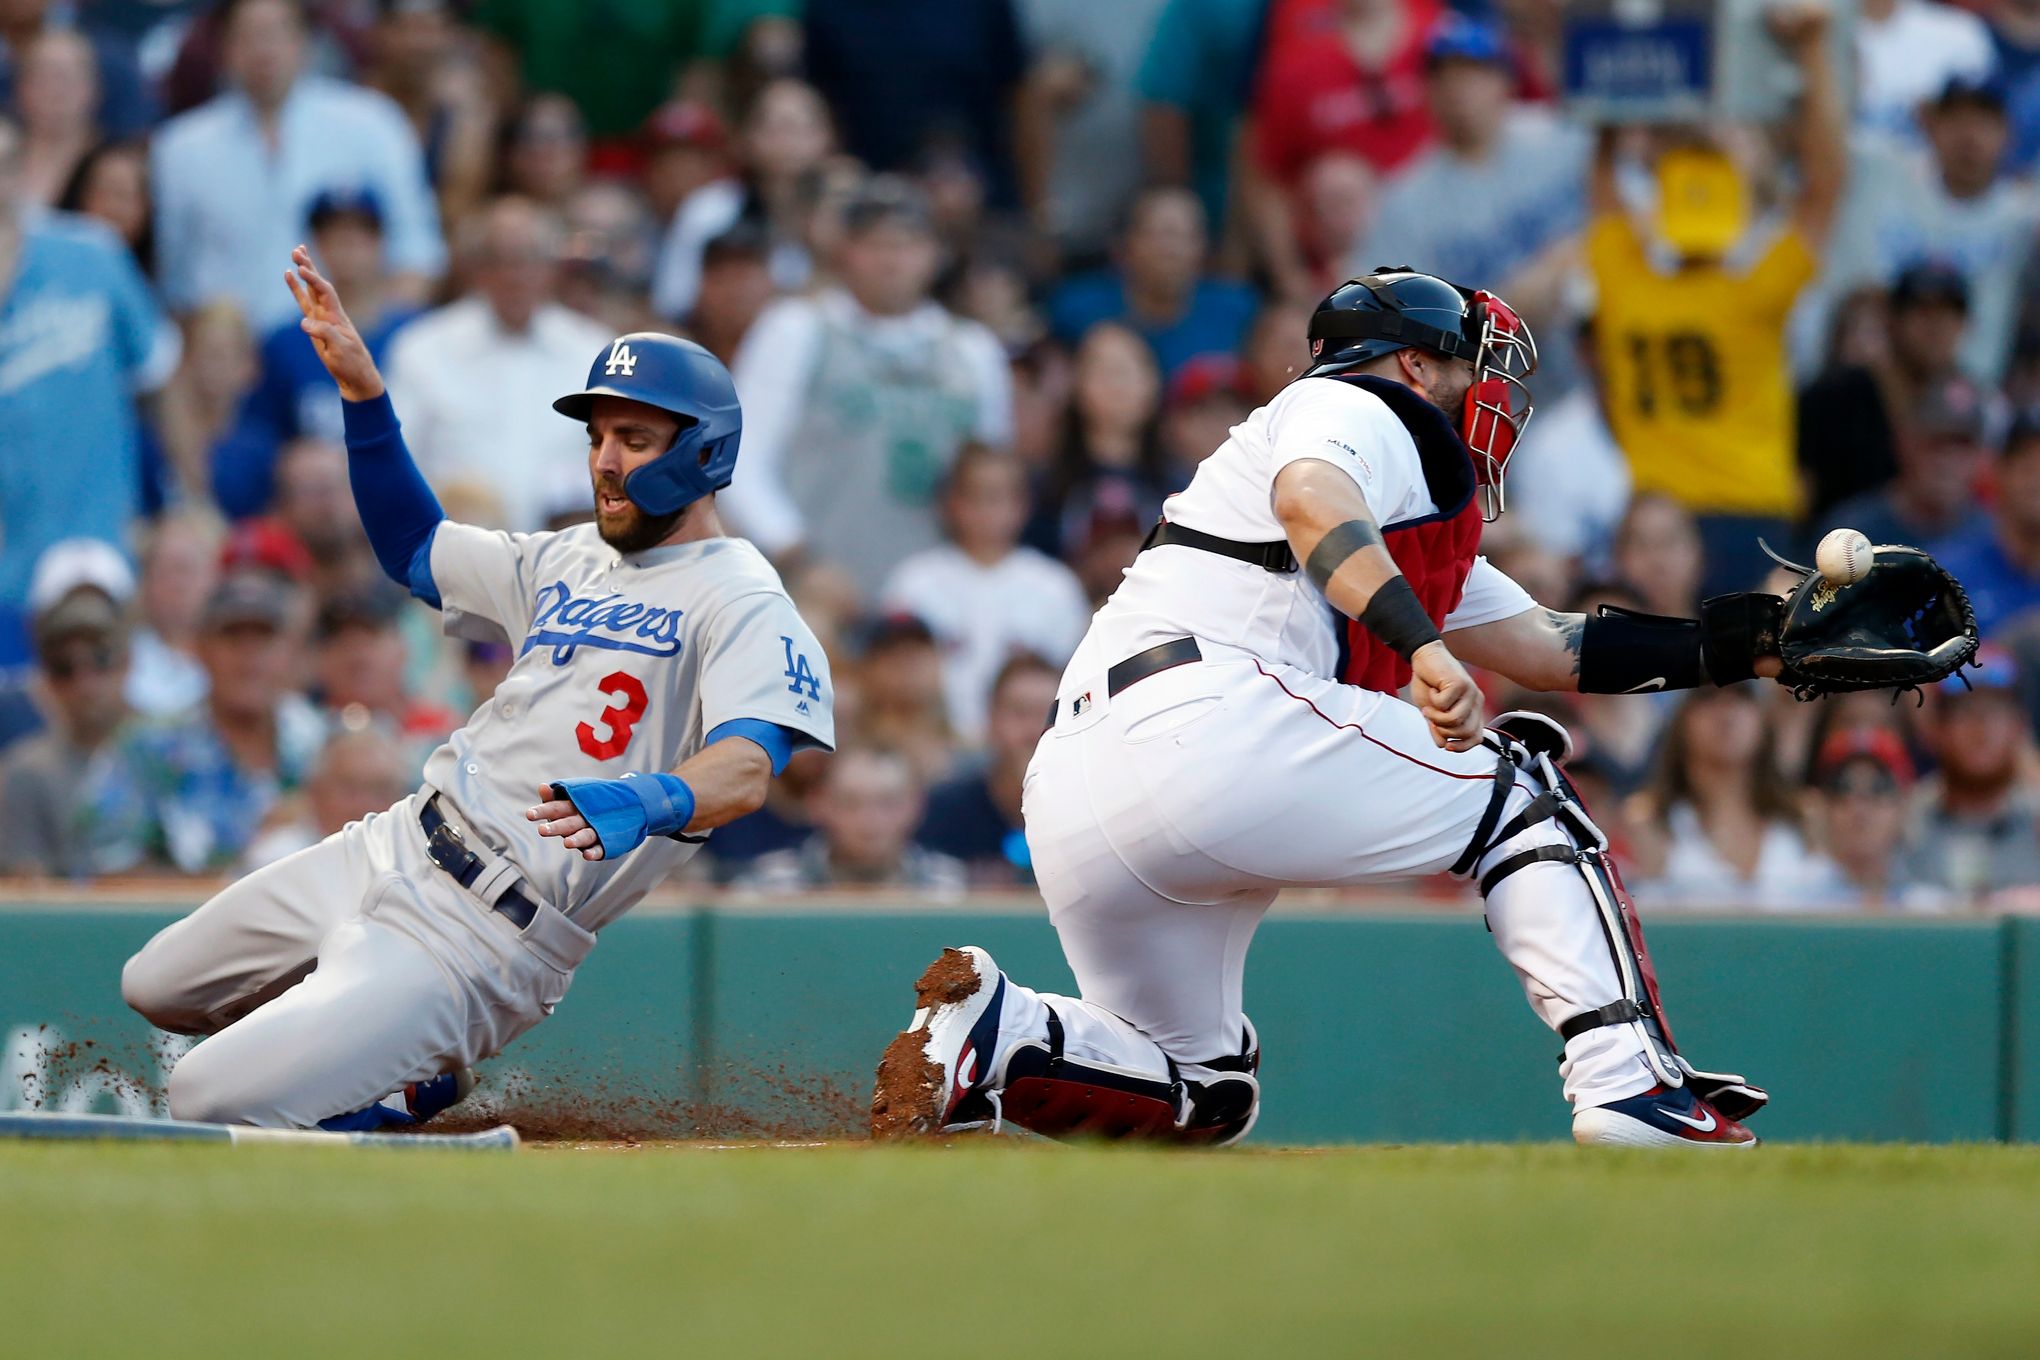 Dodgers Injury News: Chris Taylor Undergoing 2nd Set Of X-Rays On